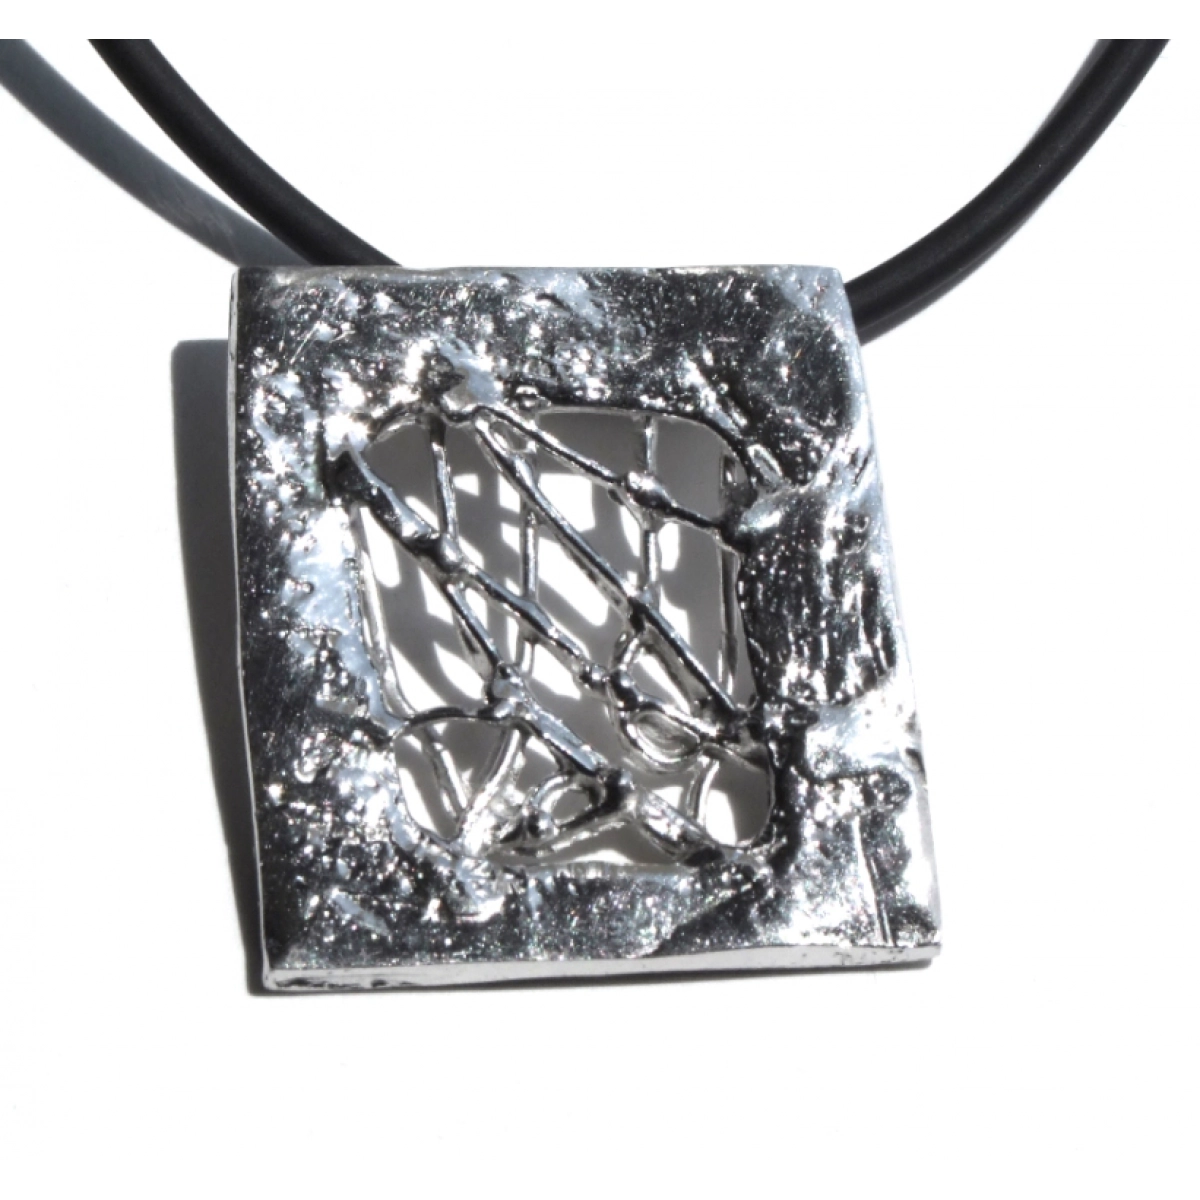 Pendant in silver, the slides collection. 4.5 x 4 cm FP C31 - P Fili Plaza FP C31-P